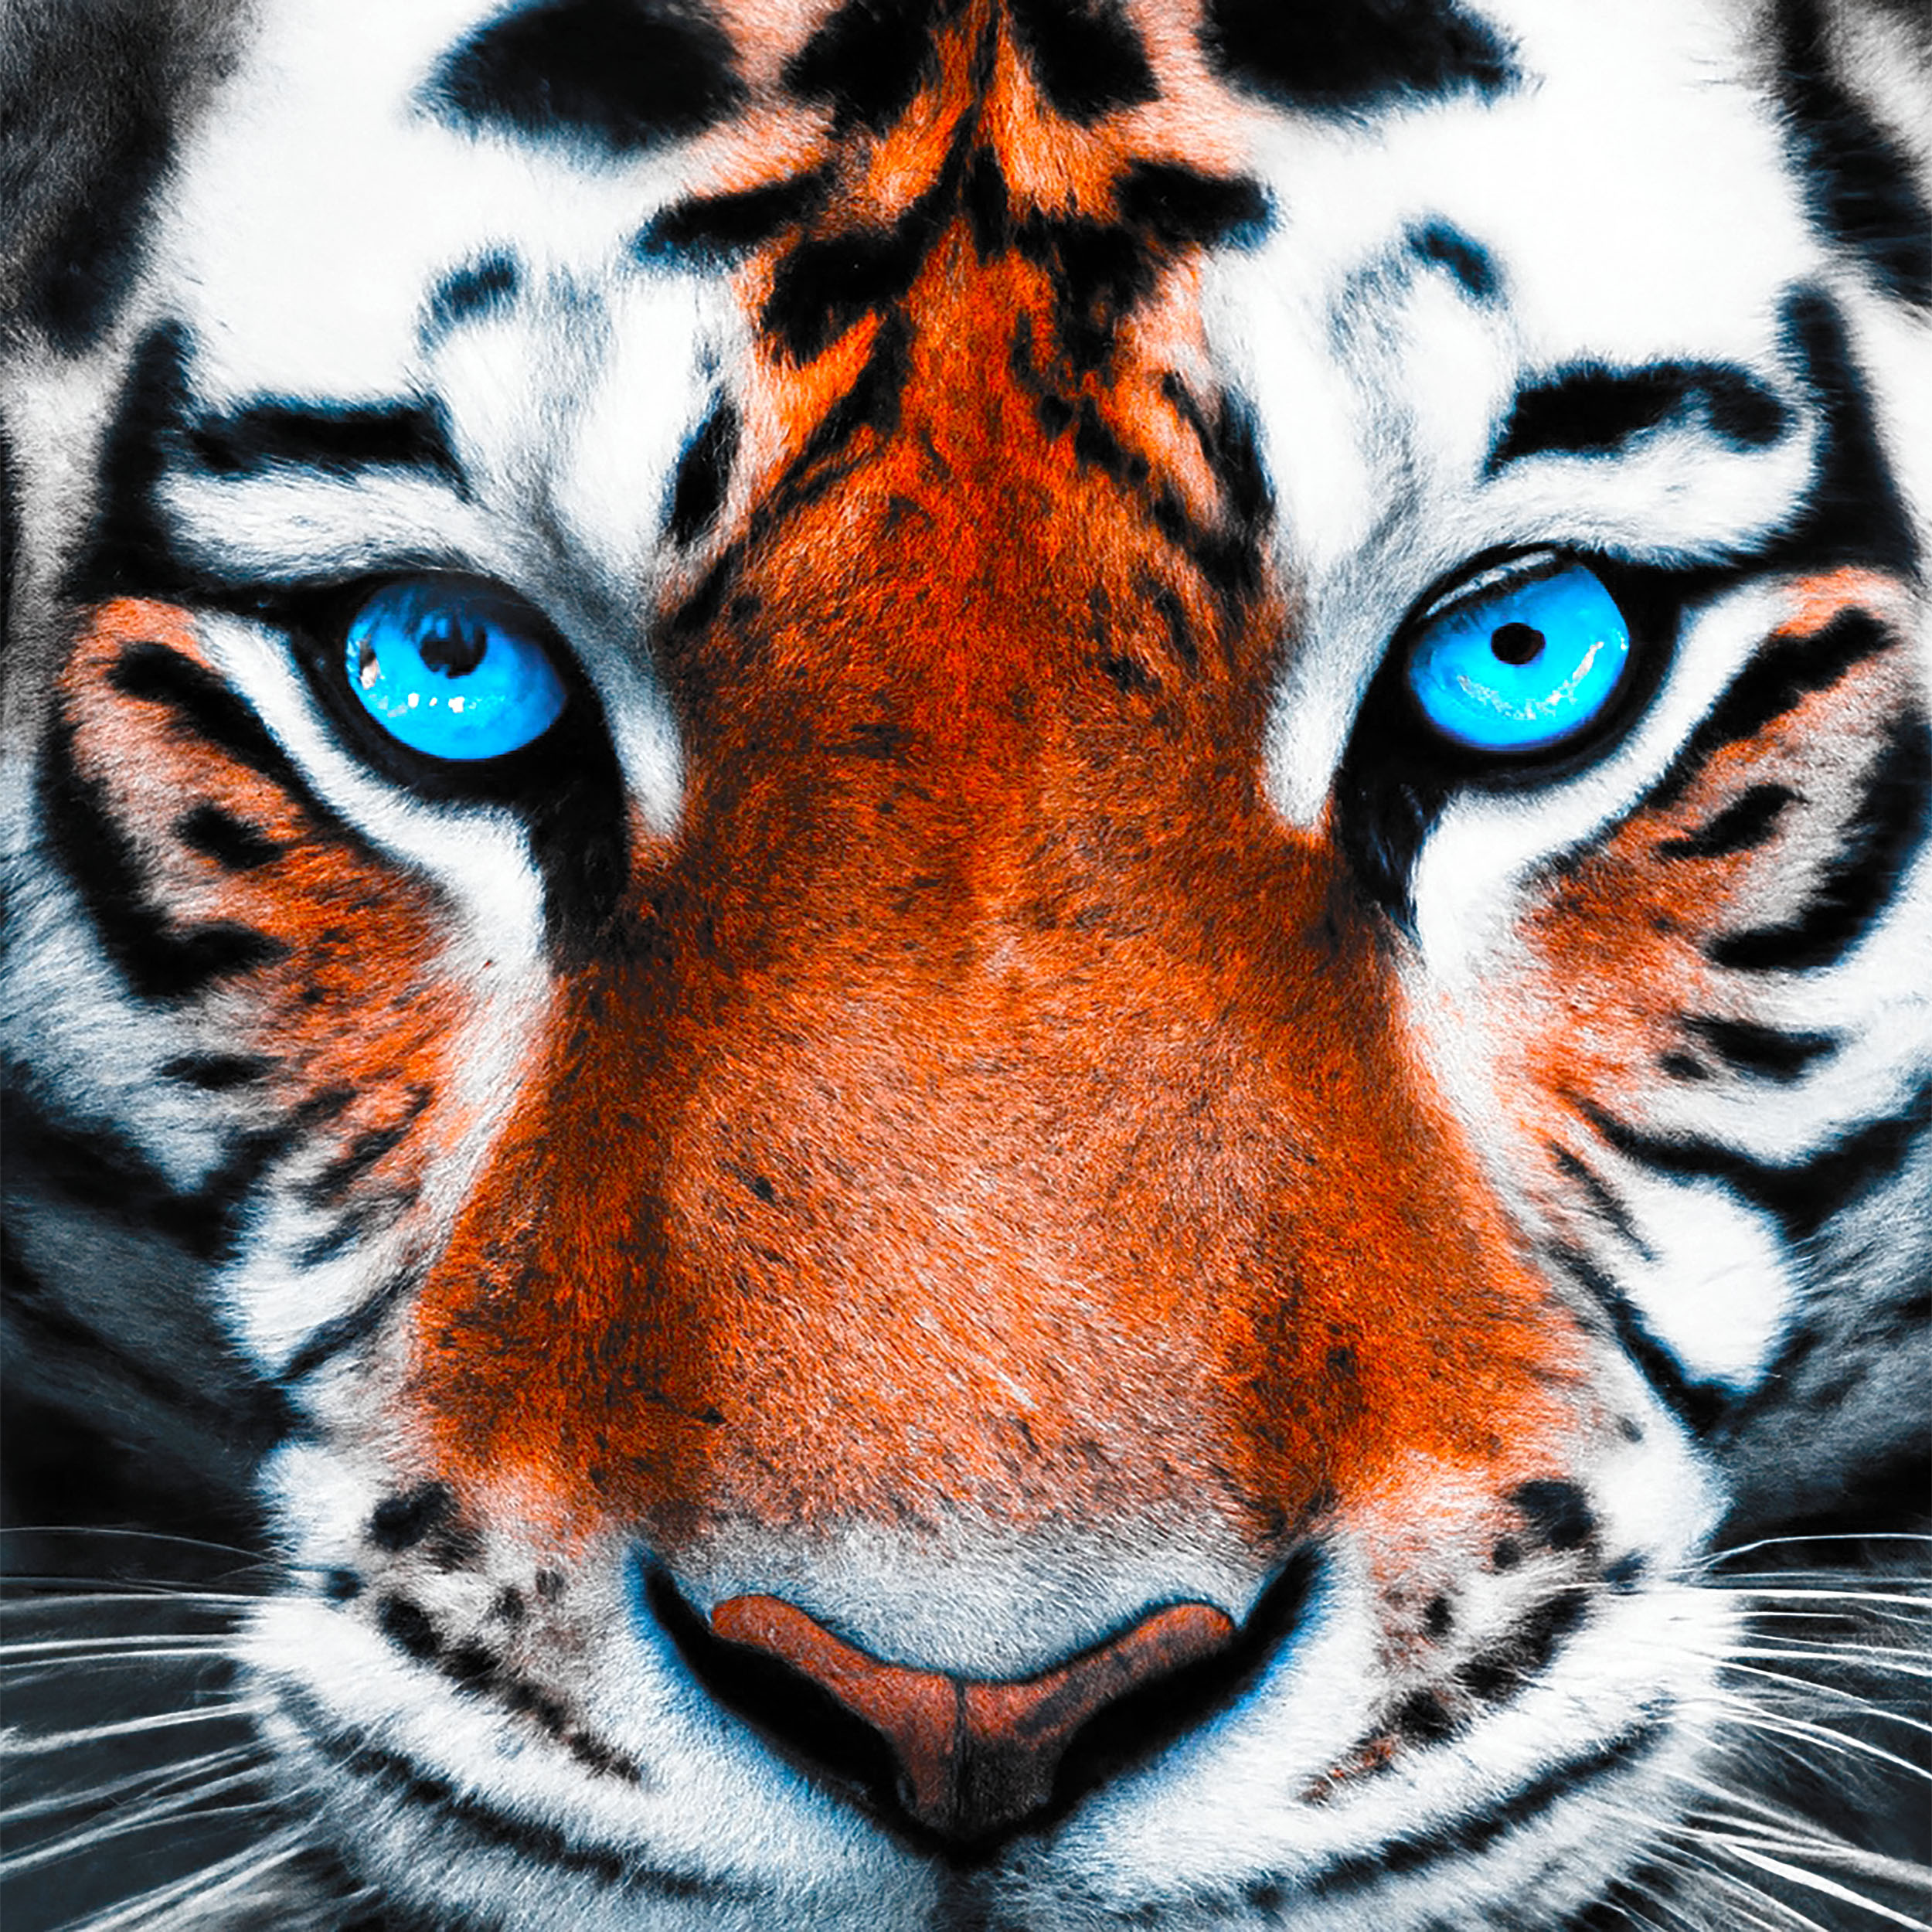 New camera takes photos using the same colors animals can see • Earth.com